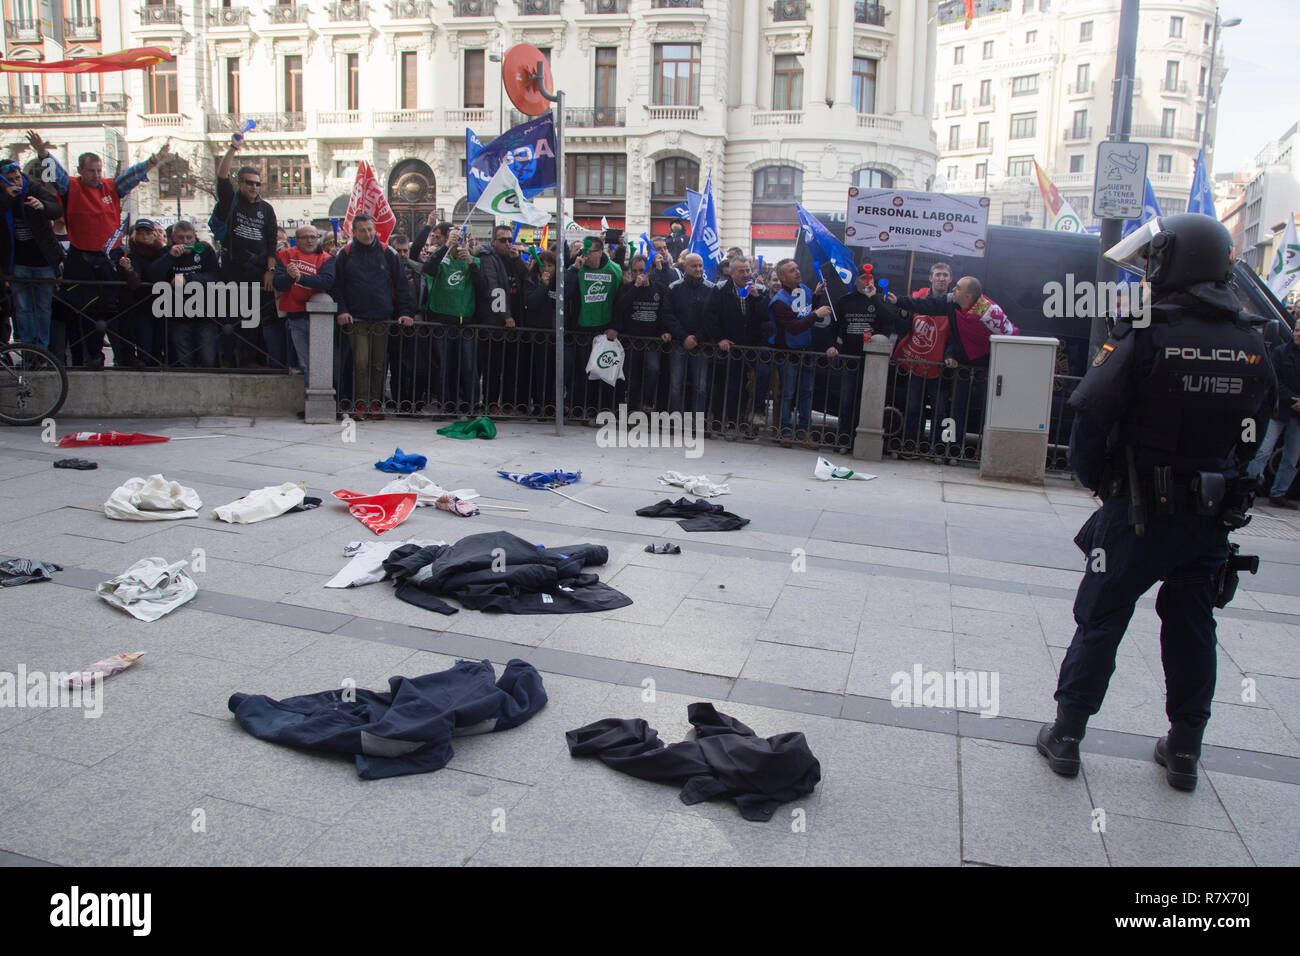 Prison workers are seen throwing their work clothes in front of the General Secretariat of Penitentiary Institutions while chanting slogans during the protest. Hundreds of striking prison workers from all parts of Spain protest on the streets of Madrid to demand a salary improvement and an increase in the workforce. Stock Photo